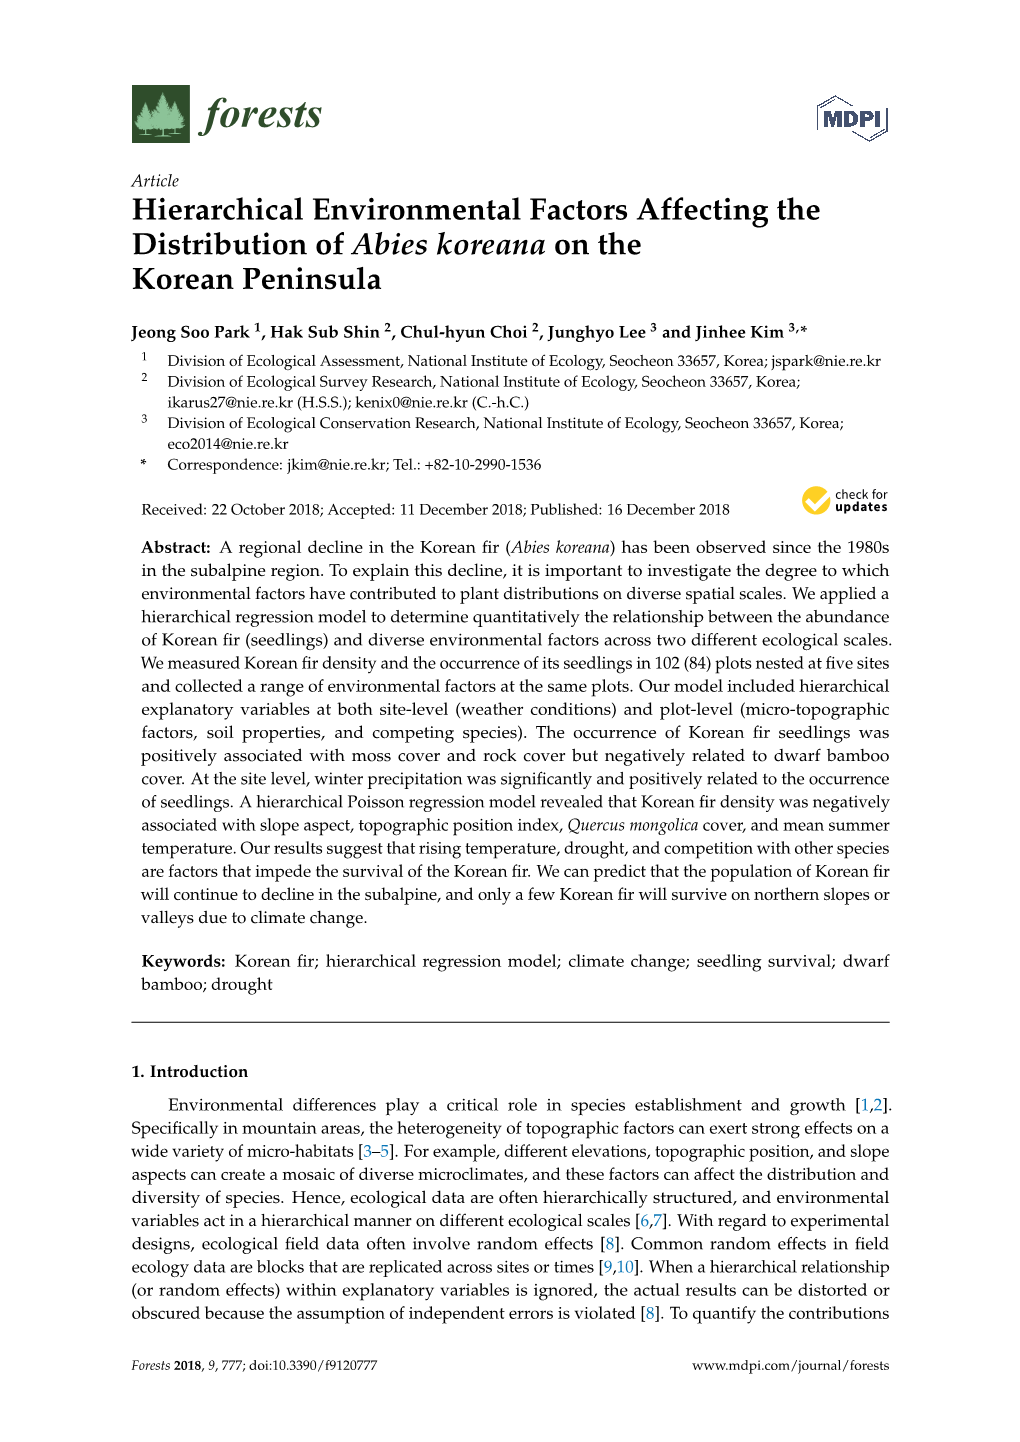 Hierarchical Environmental Factors Affecting the Distribution of Abies Koreana on the Korean Peninsula